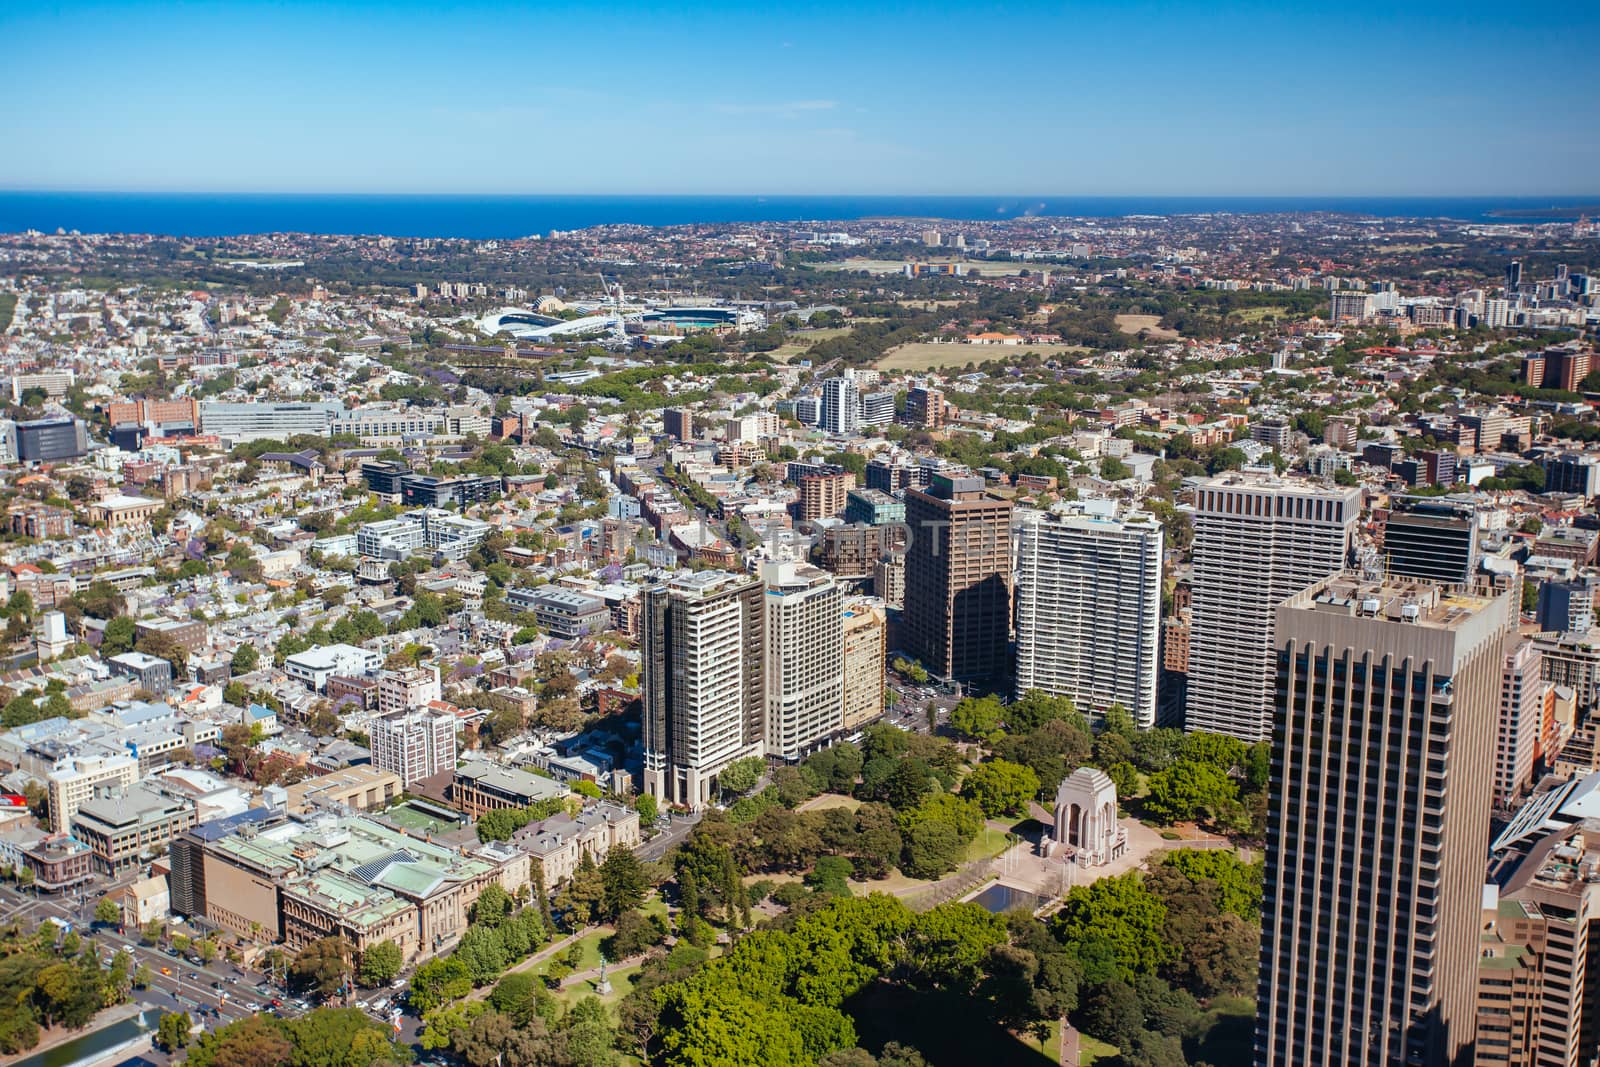 An aerial view of Hyde Park, Darlinghurst, Paddington and Allianz Stadium on a clear sunny day in Sydney, NSW, Australia